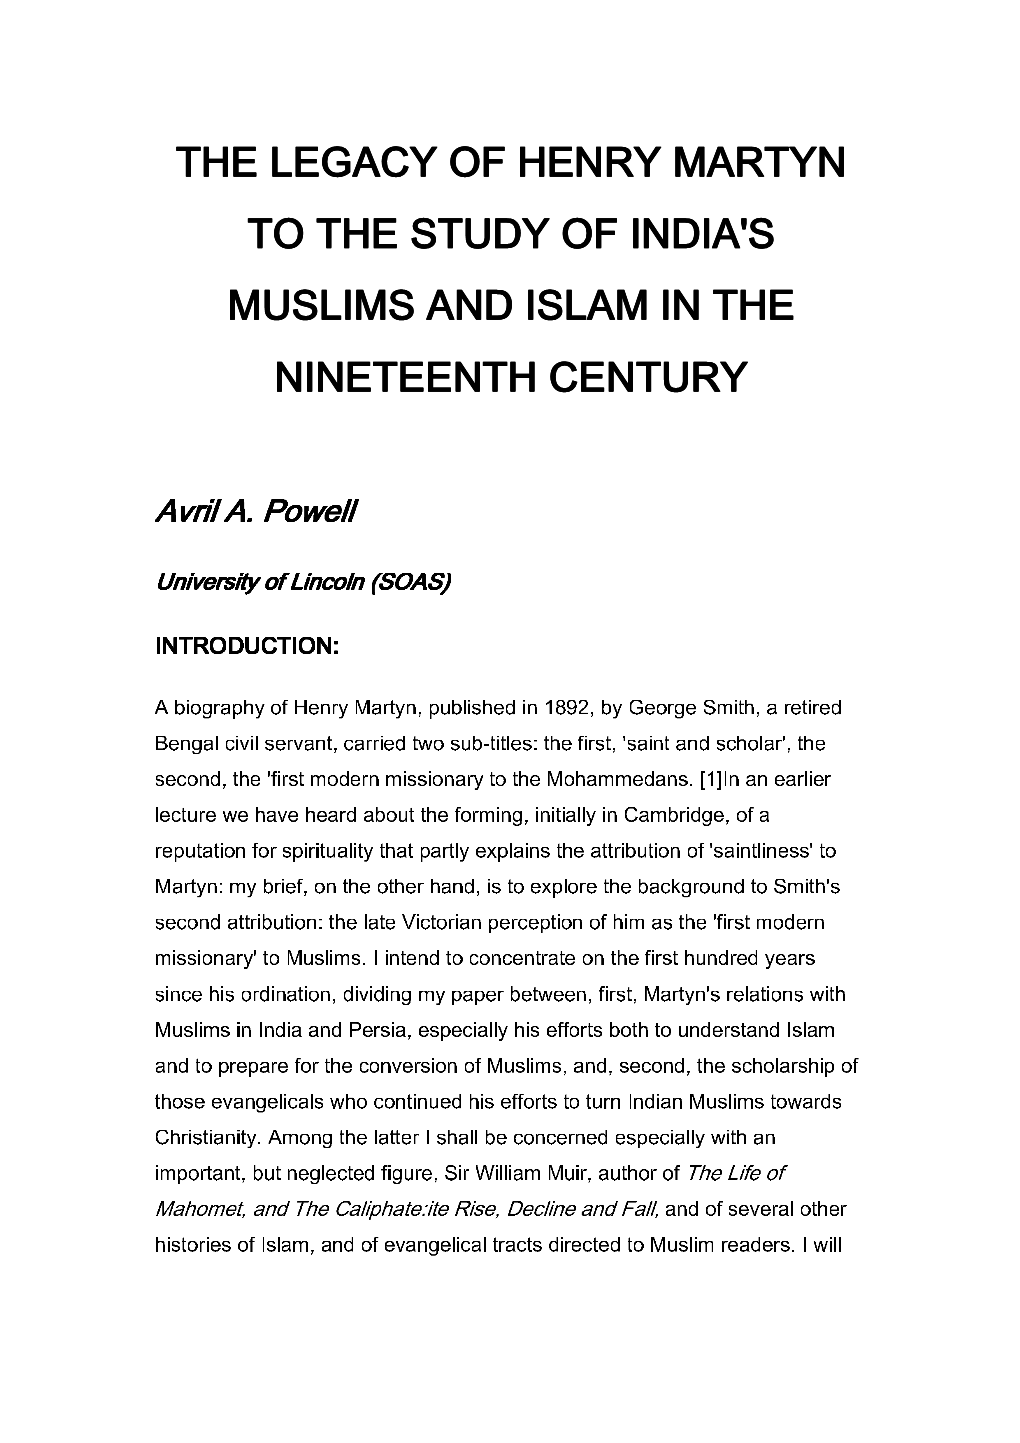 The Legacy of Henry Martyn to the Study of India's Muslims and Islam in the Nineteenth Century